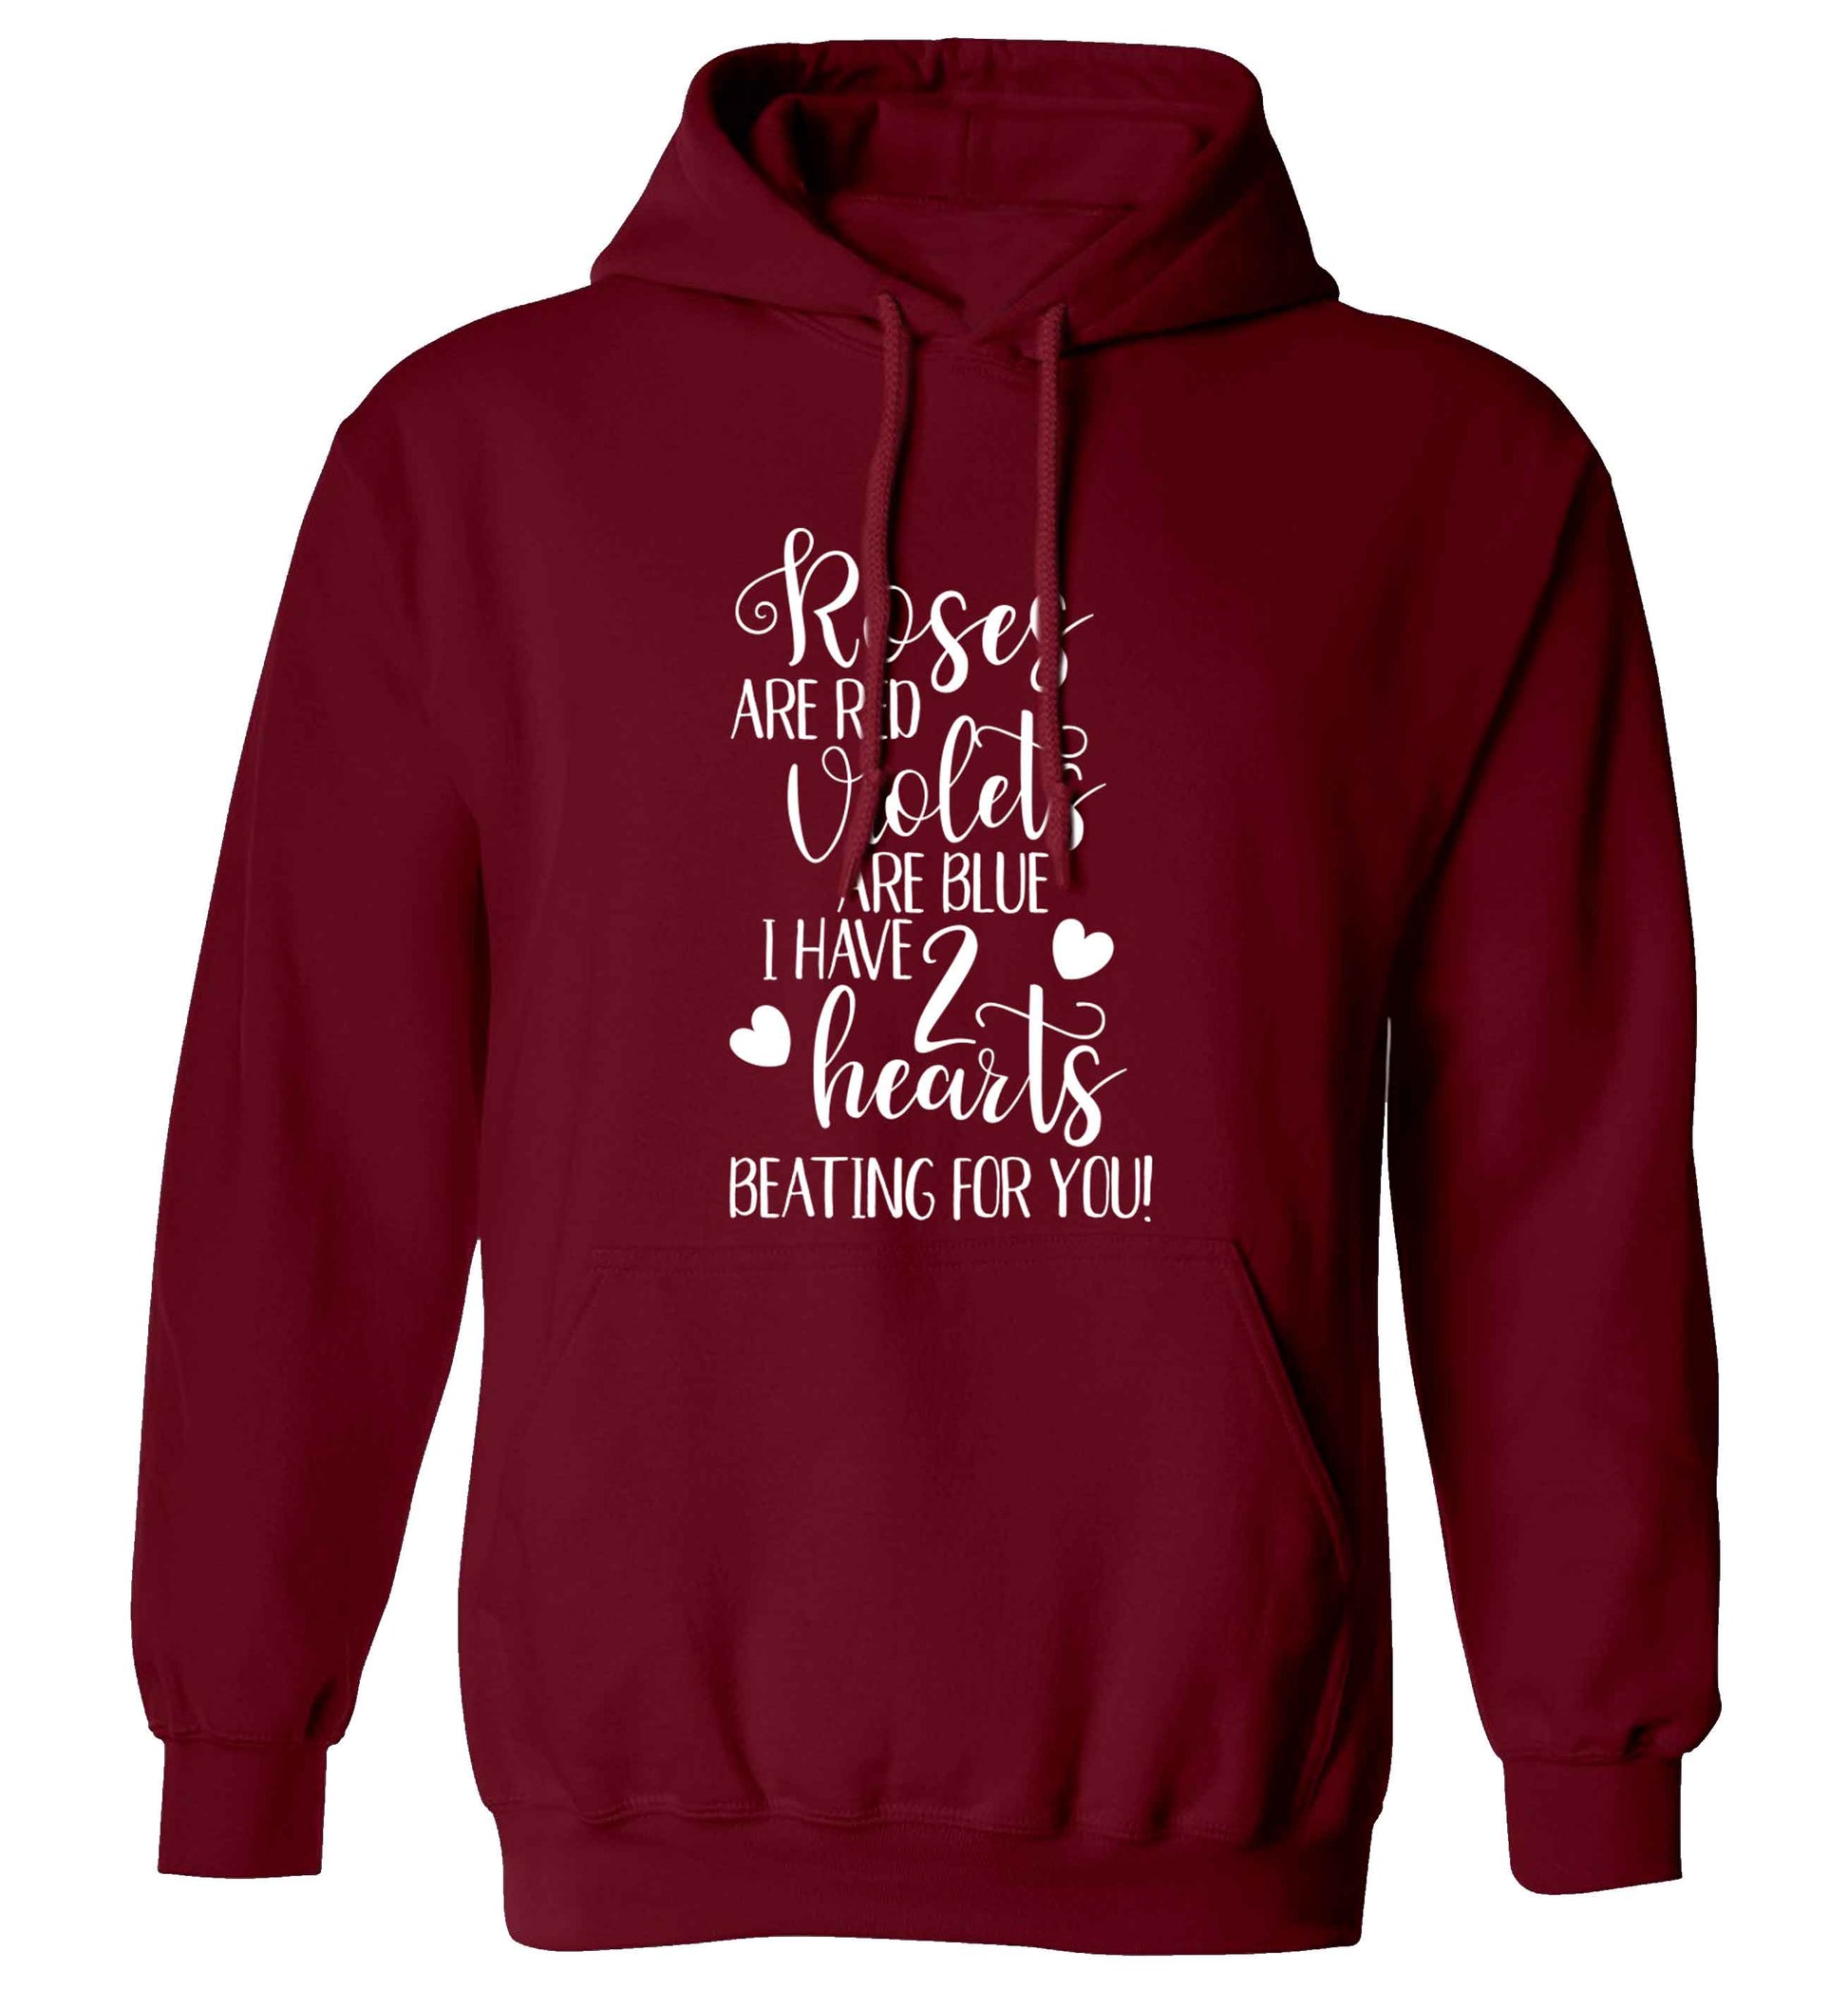 Roses are red violets are blue I have two hearts beating for you adults unisex maroon hoodie 2XL